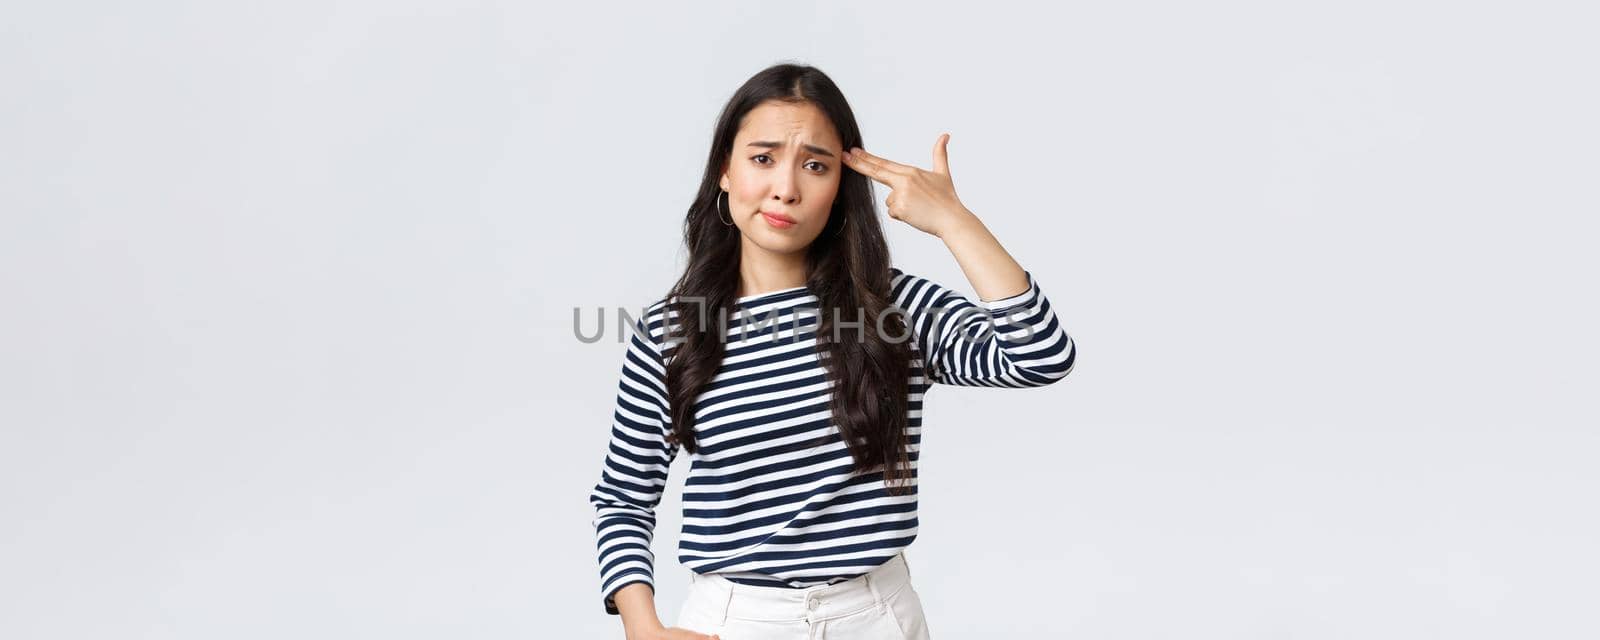 Lifestyle, people emotions and casual concept. Annoyed and pissed-off young woman cant stand this anymore, showing fake gun over head as if shooting herself from annoyance.